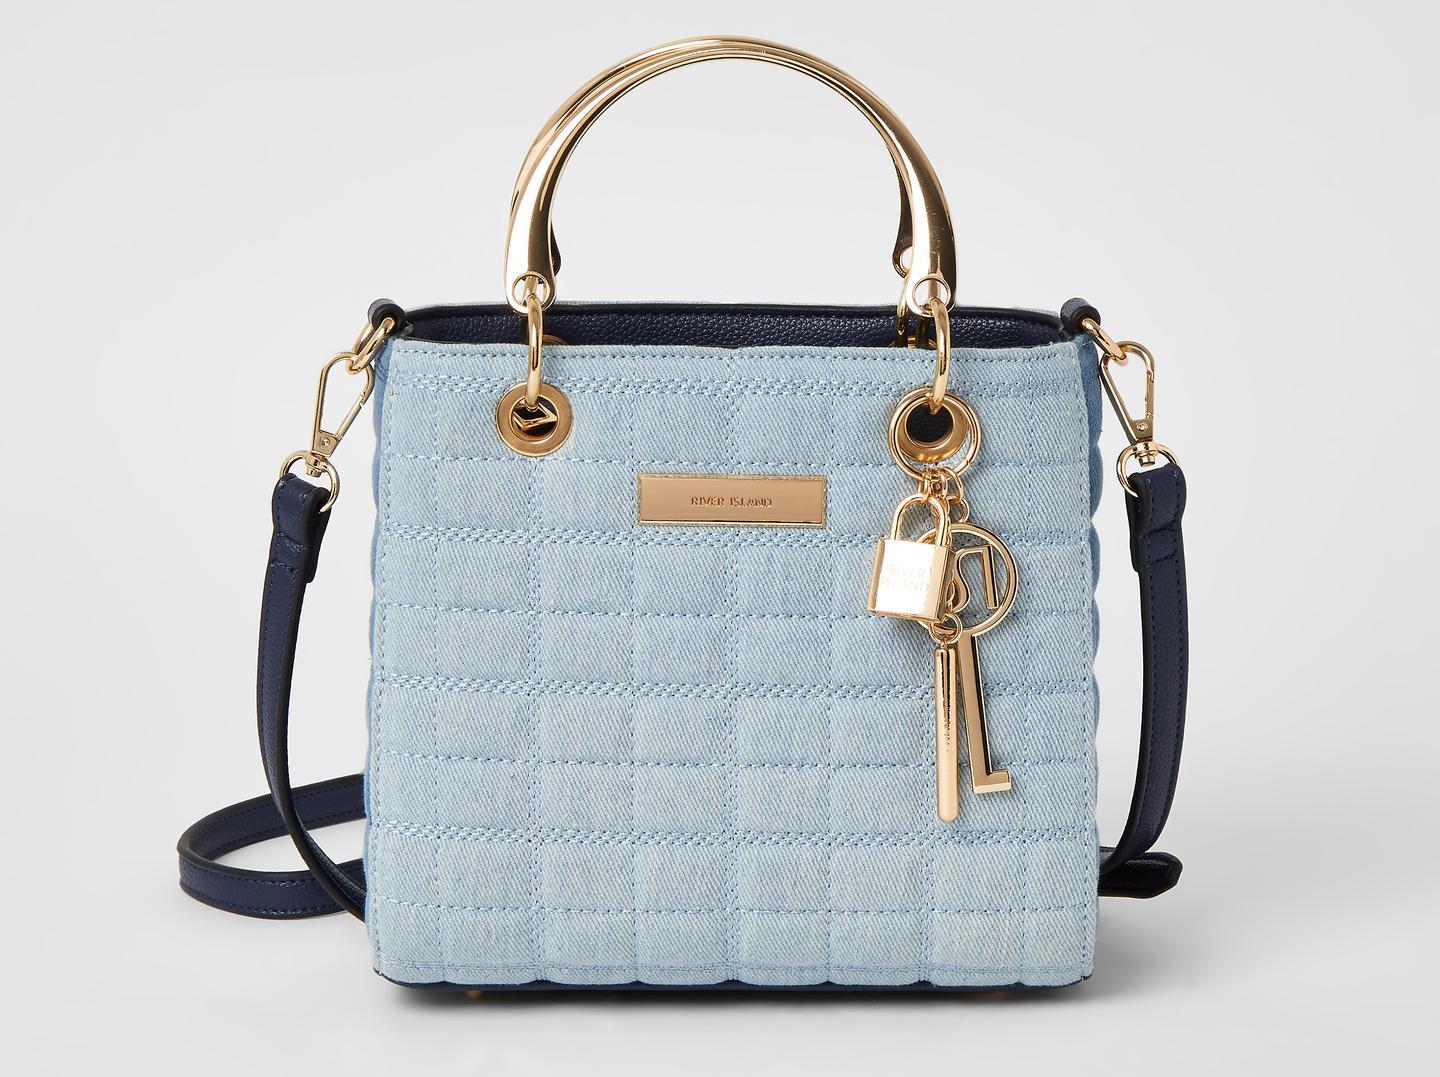 Denim goes super-dressy with this cute quilted small-sizebag with both carry and cross-body handles - and added metallic gold bling accessories. A cool touch for a new nautical look. Blue denim quilted cross body tote bag, 36, River Island.